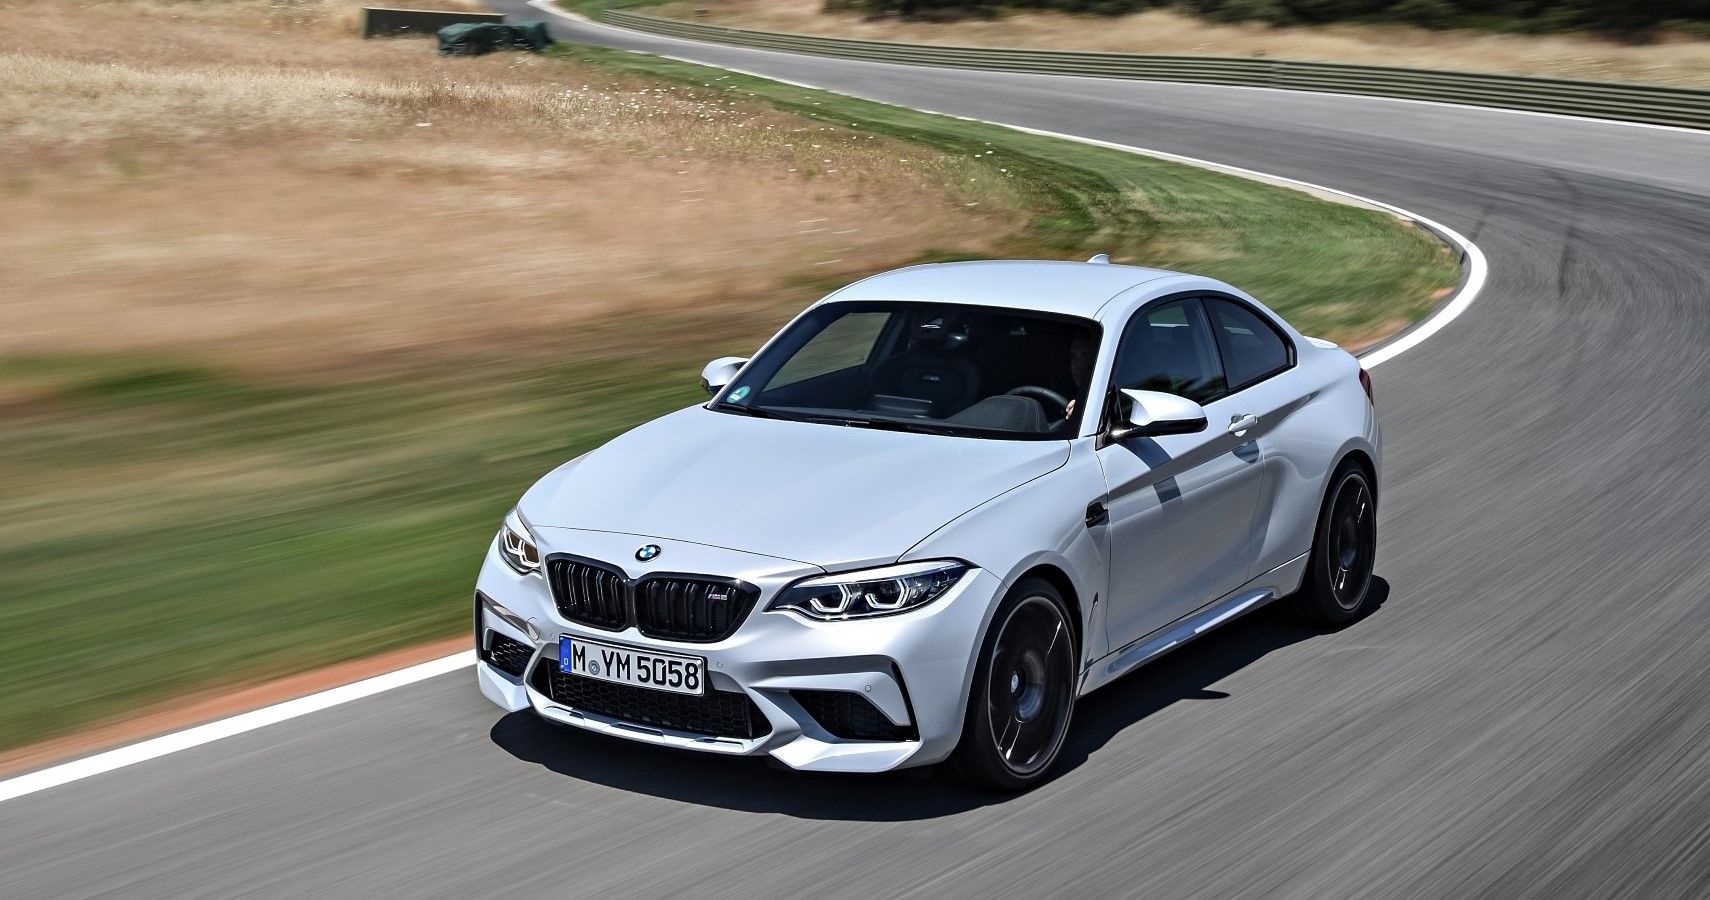 BMW M2 Competition accelerating on the racetrack